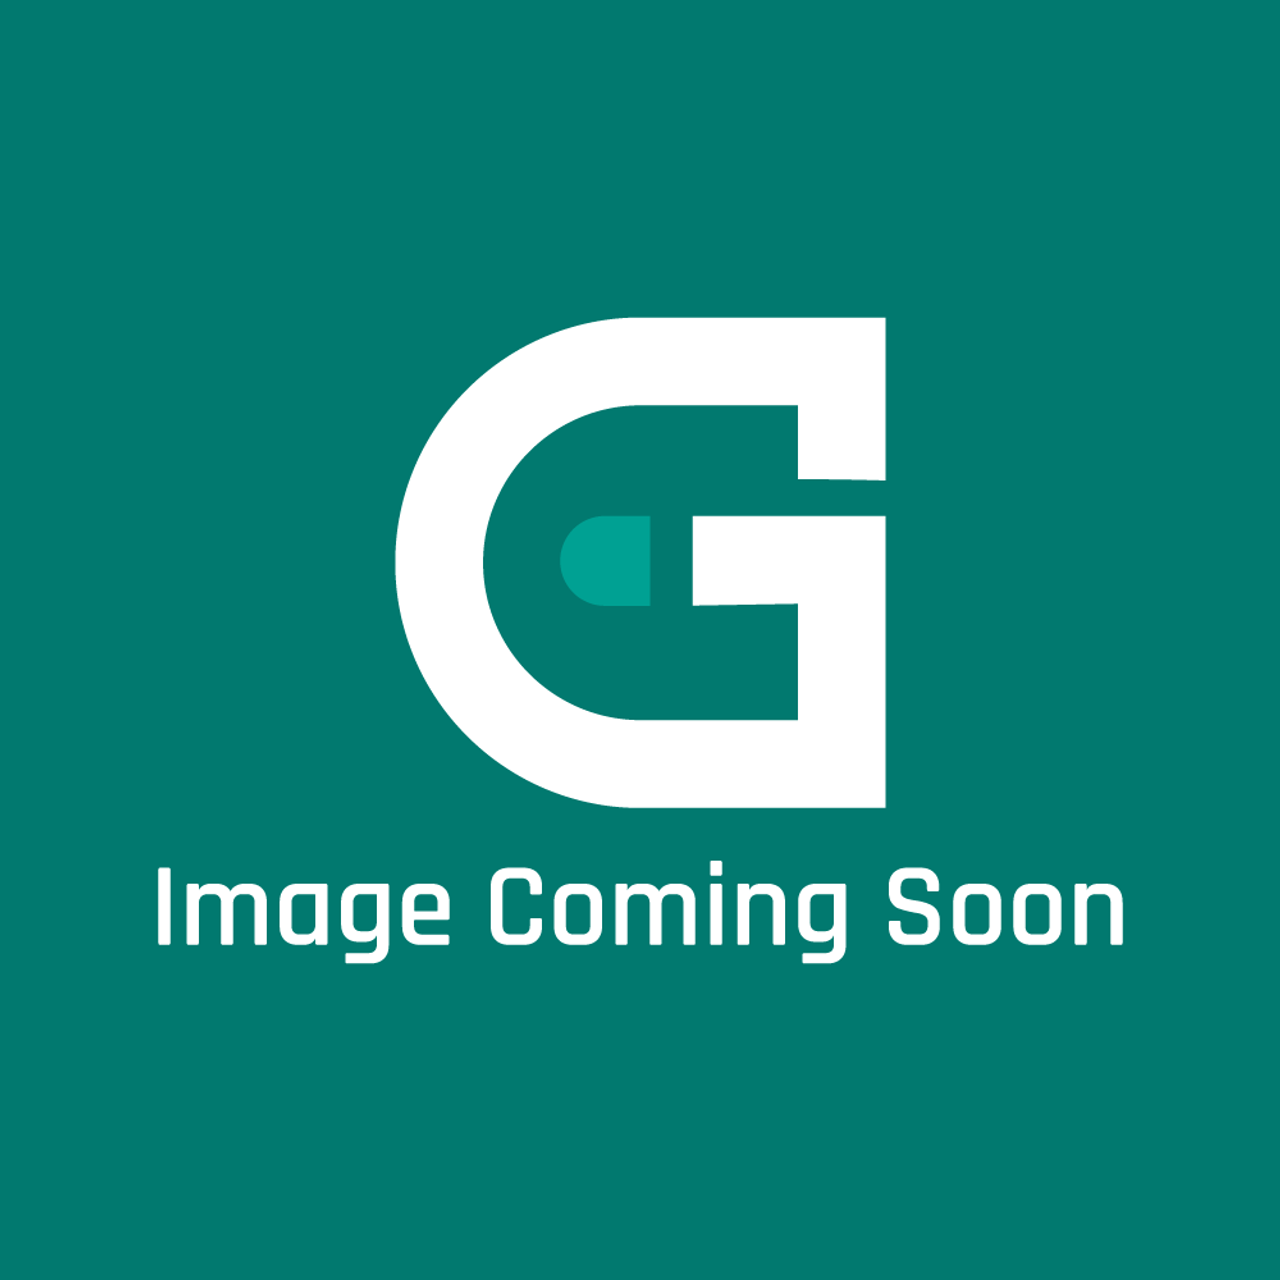 GE Appliances 70W88 - 605154-02 Lpg To Nat Conv Kit (A96) - Image Coming Soon!